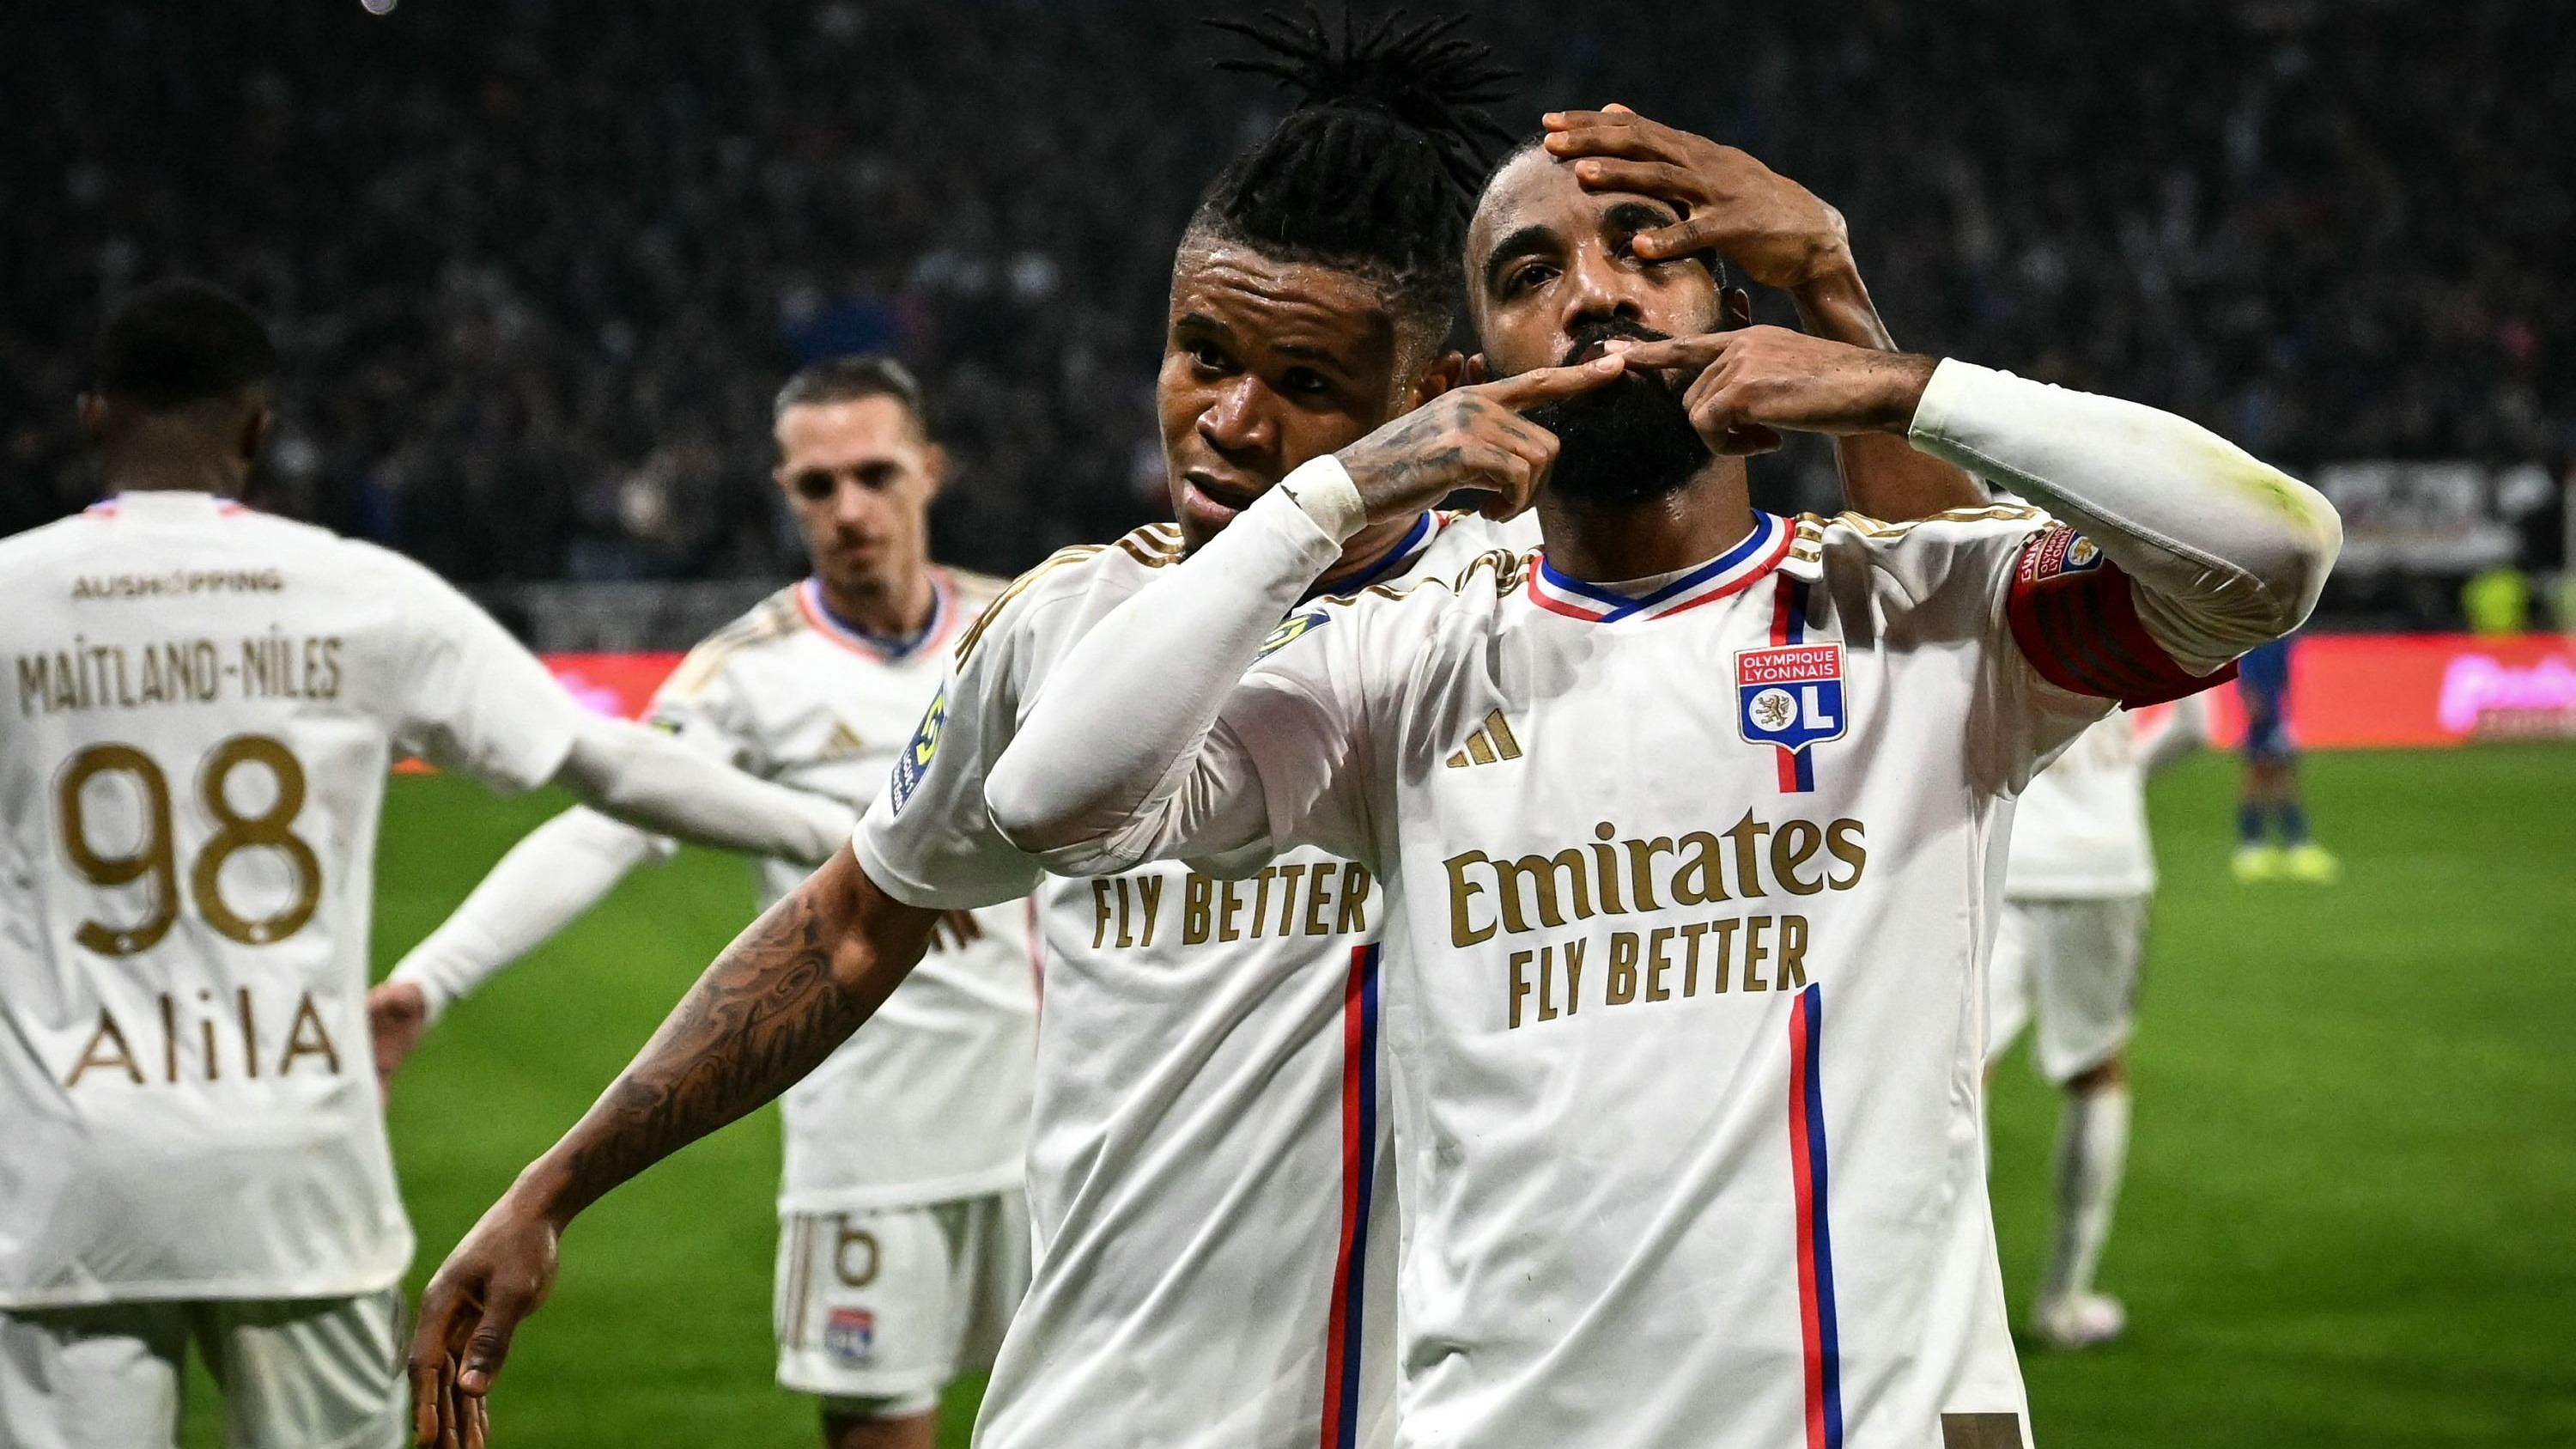 Ligue 1: Lyon brings down Marseille in the “Olympico” and gives itself a little breathing space